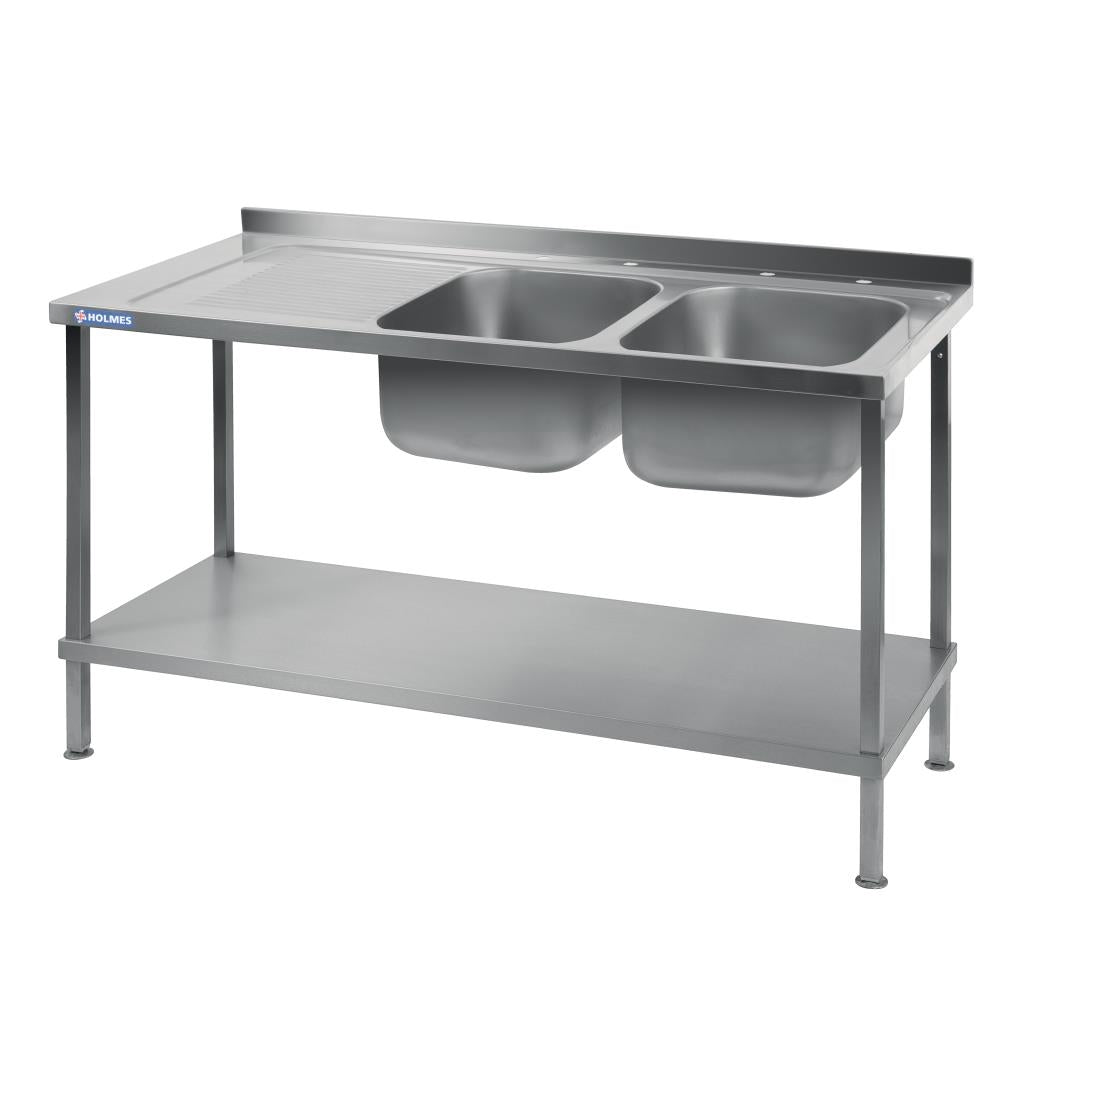 DR393 Holmes Fully Assembled Stainless Steel Sink Left Hand Drainer 1800mm JD Catering Equipment Solutions Ltd